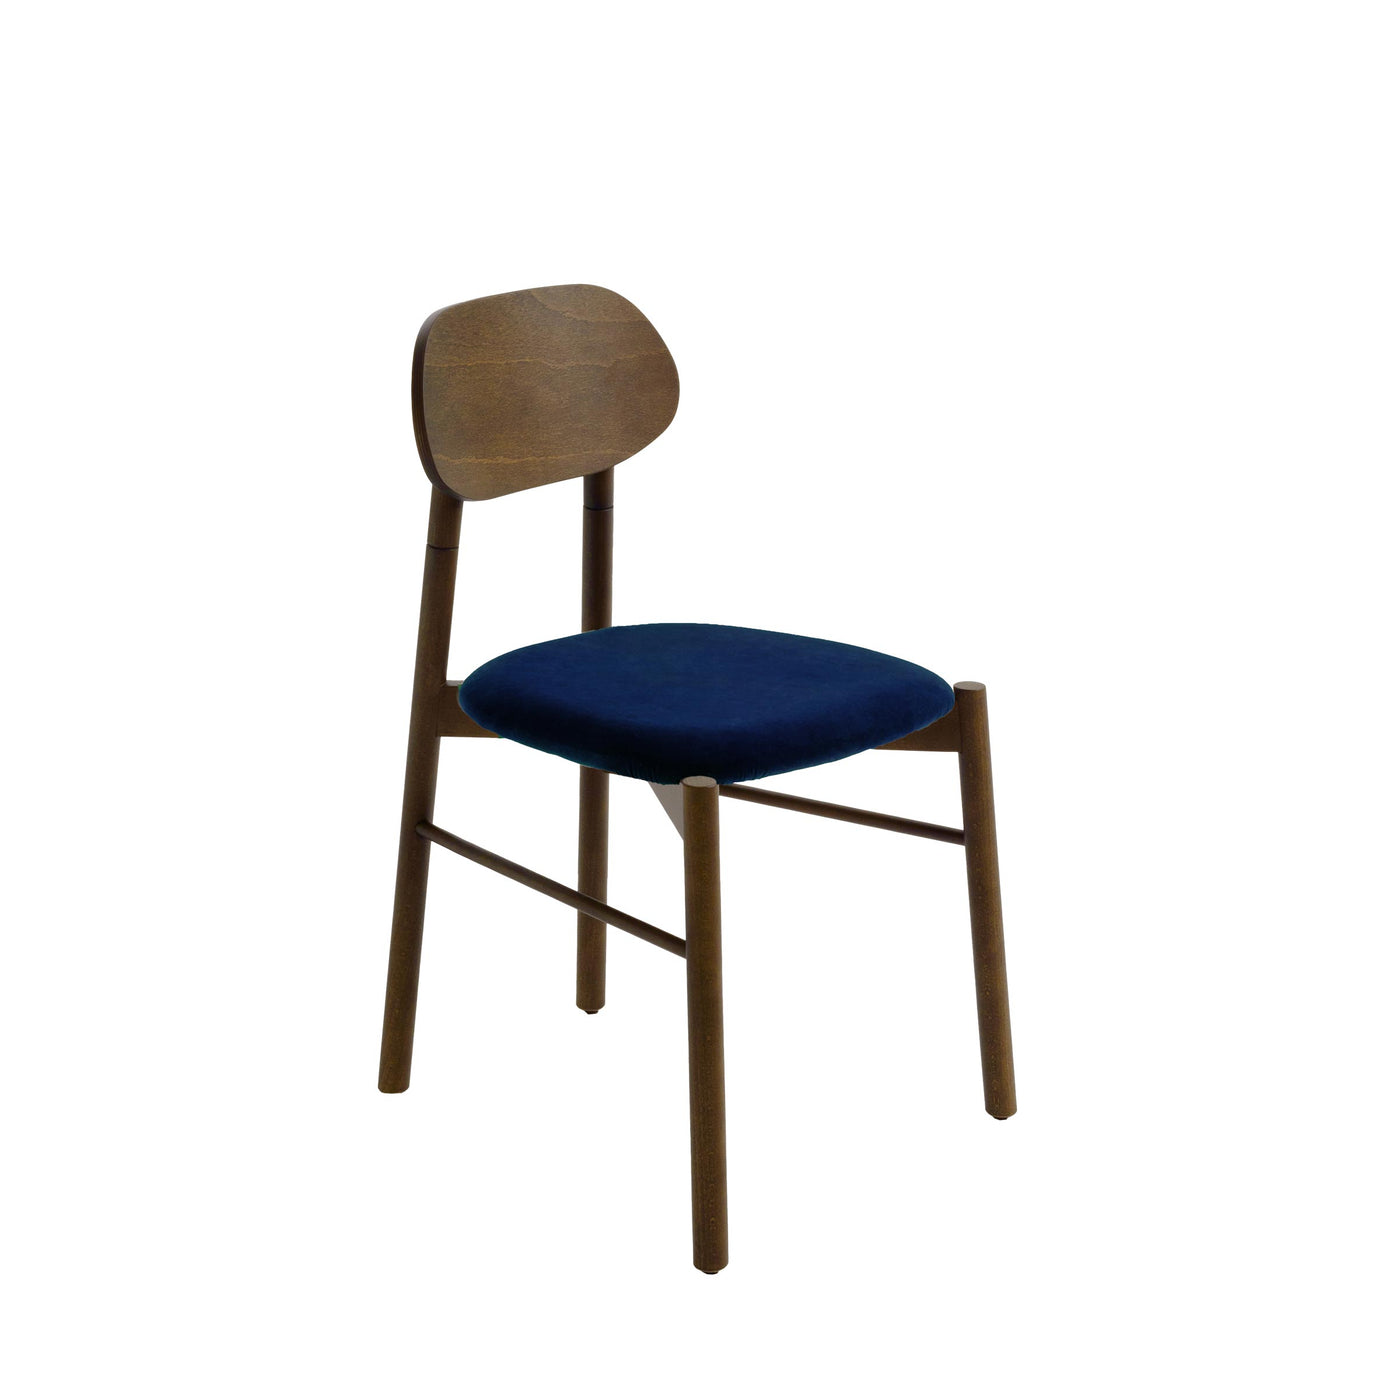 Upholstered Dining Chair BOKKEN by Bellavista + Piccini for Colé Italia 09